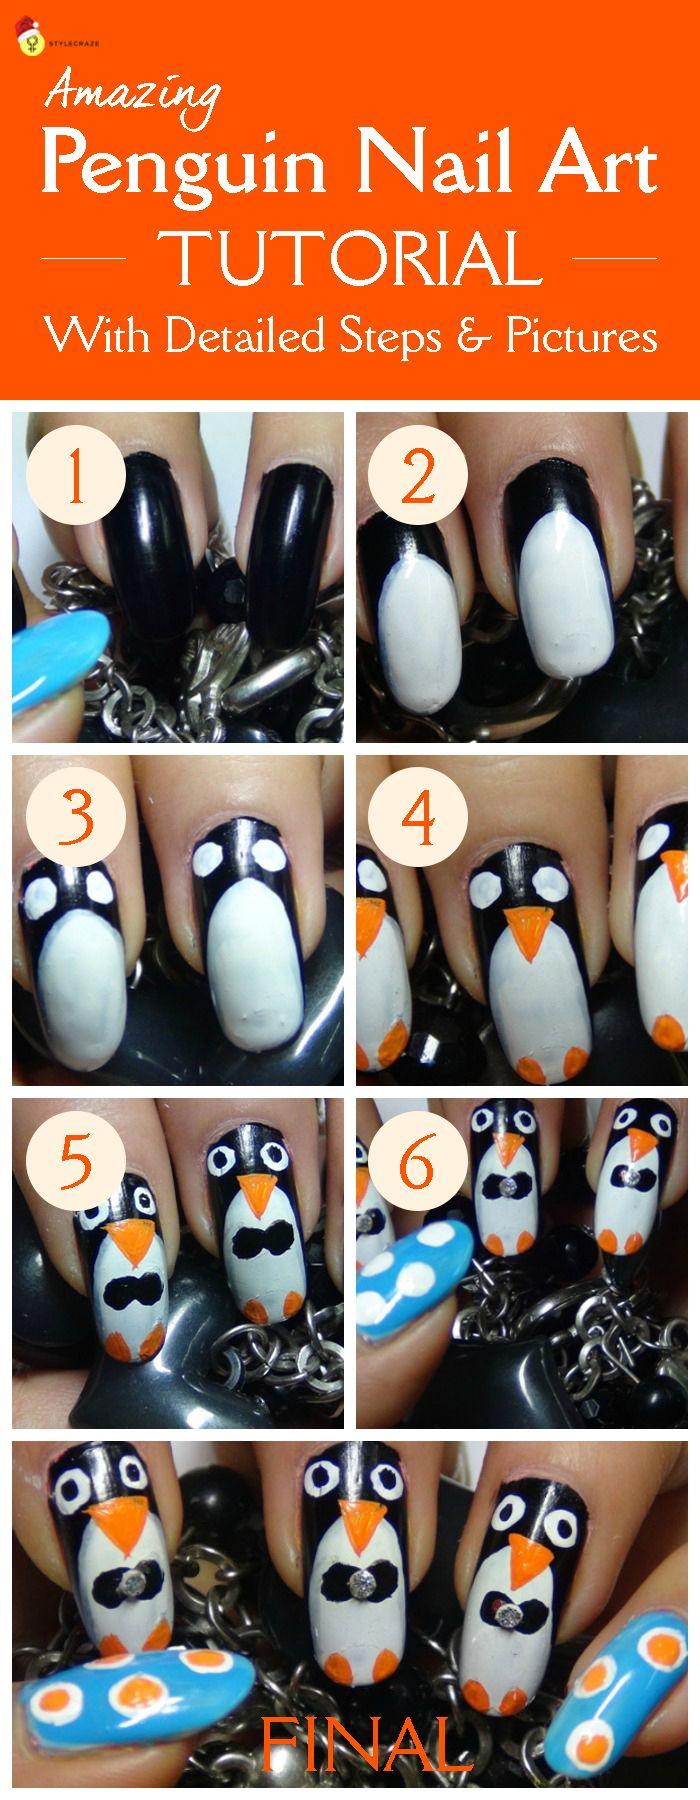 Wedding - Amazing Penguin Nail Art Tutorial With Detailed Steps & Pictures